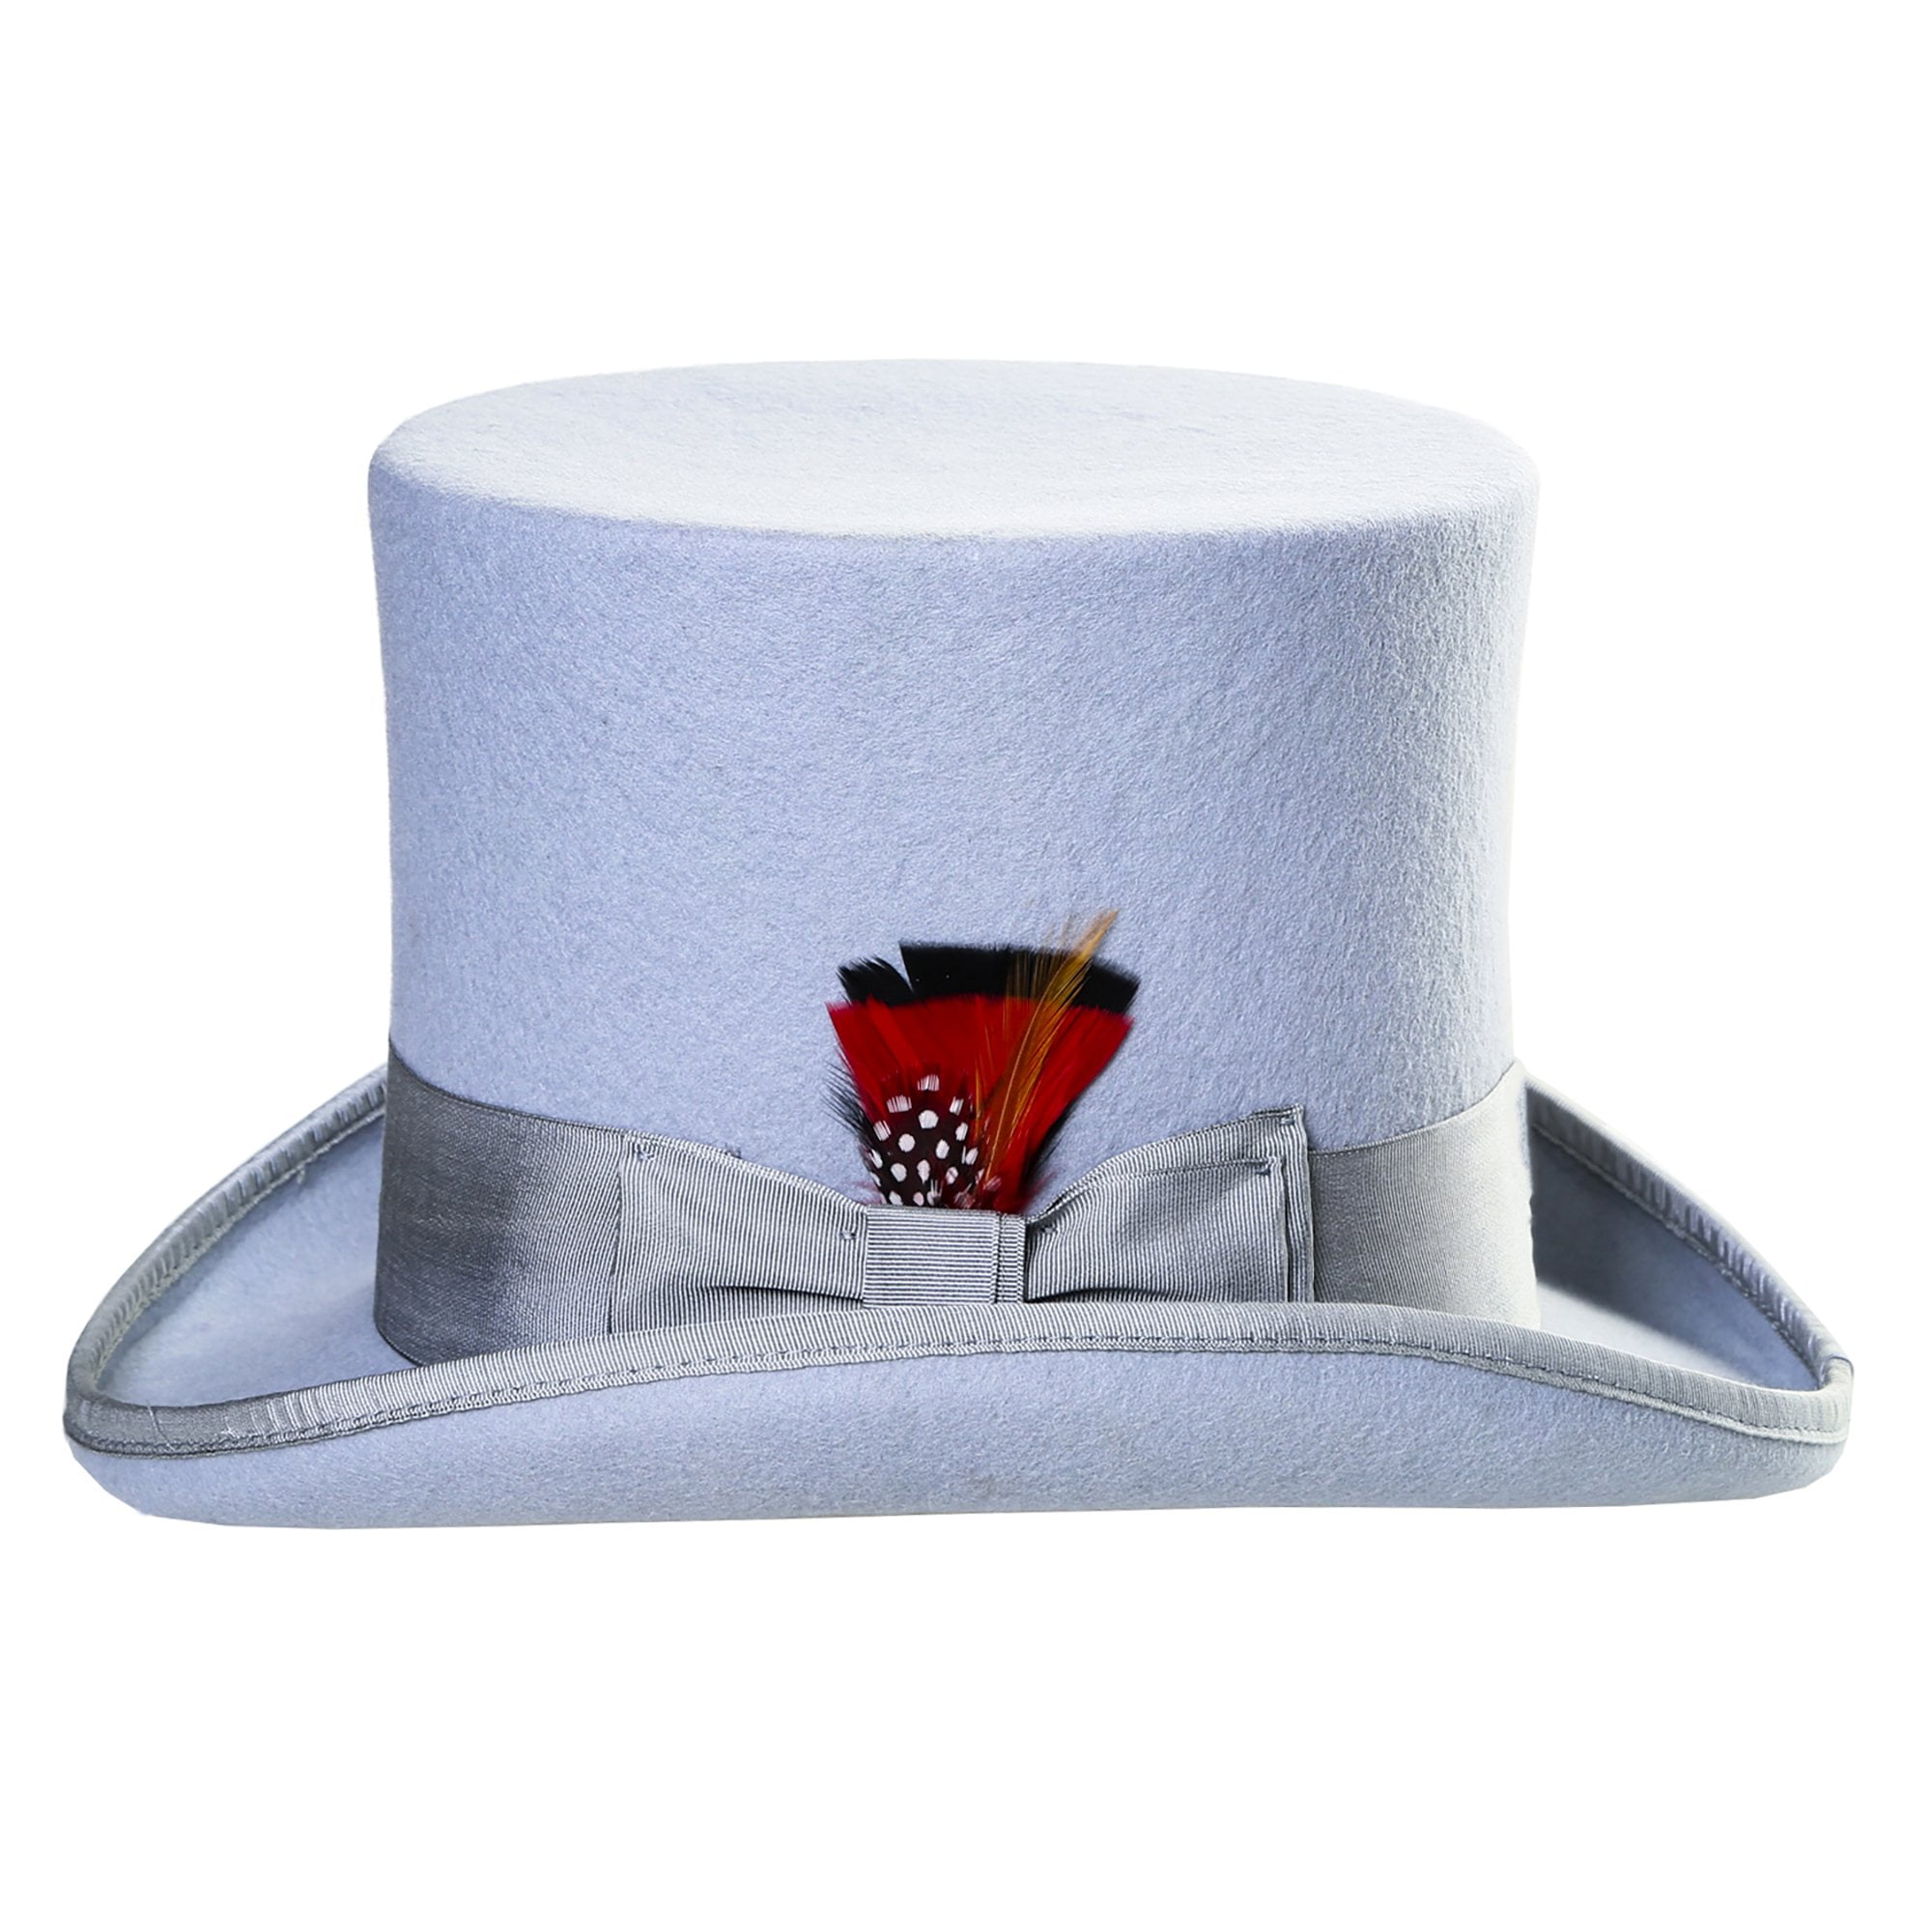 Gents Wedding Derby Event 100% Wool Hand Made Satin Lined Blue Felt Top Hat 